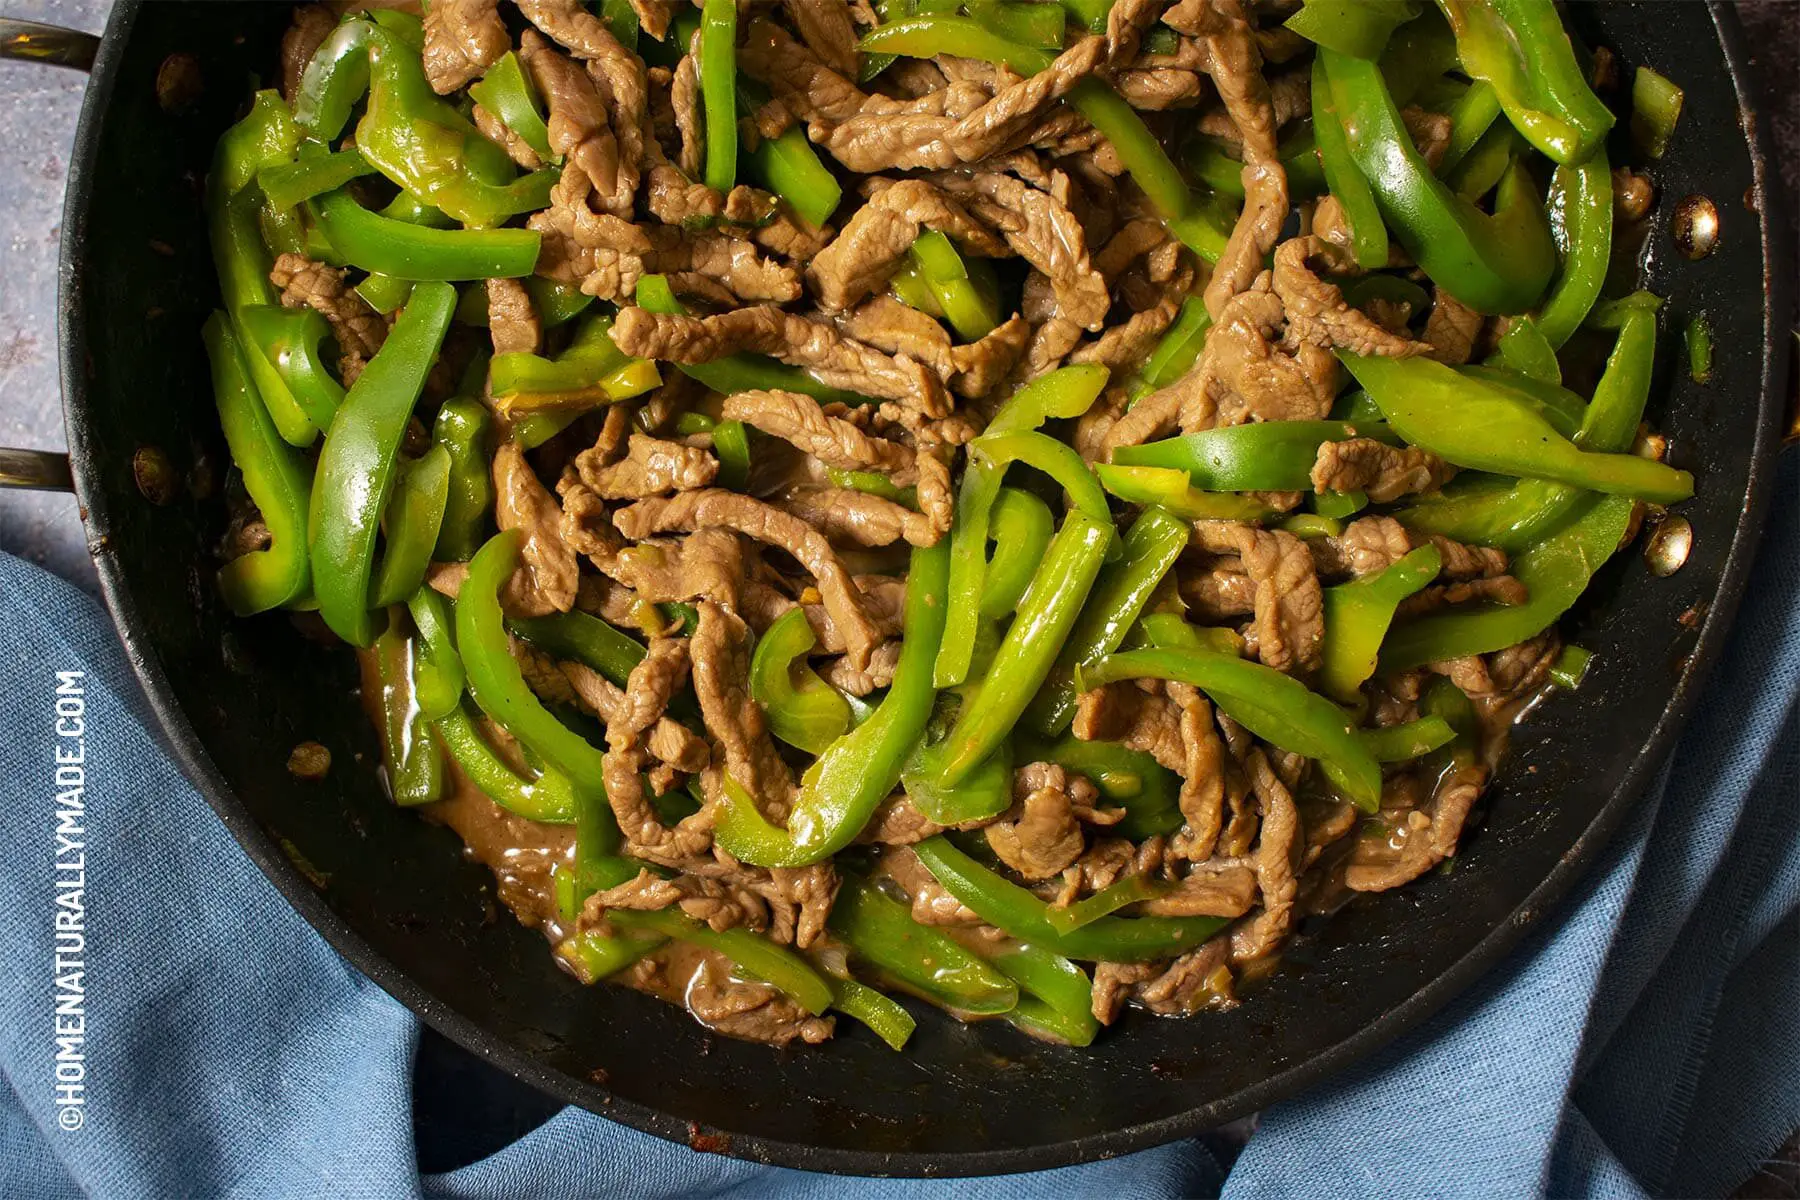 Beef Slices with Green Peppe4r Stir-Fry {青椒牛肉丝}